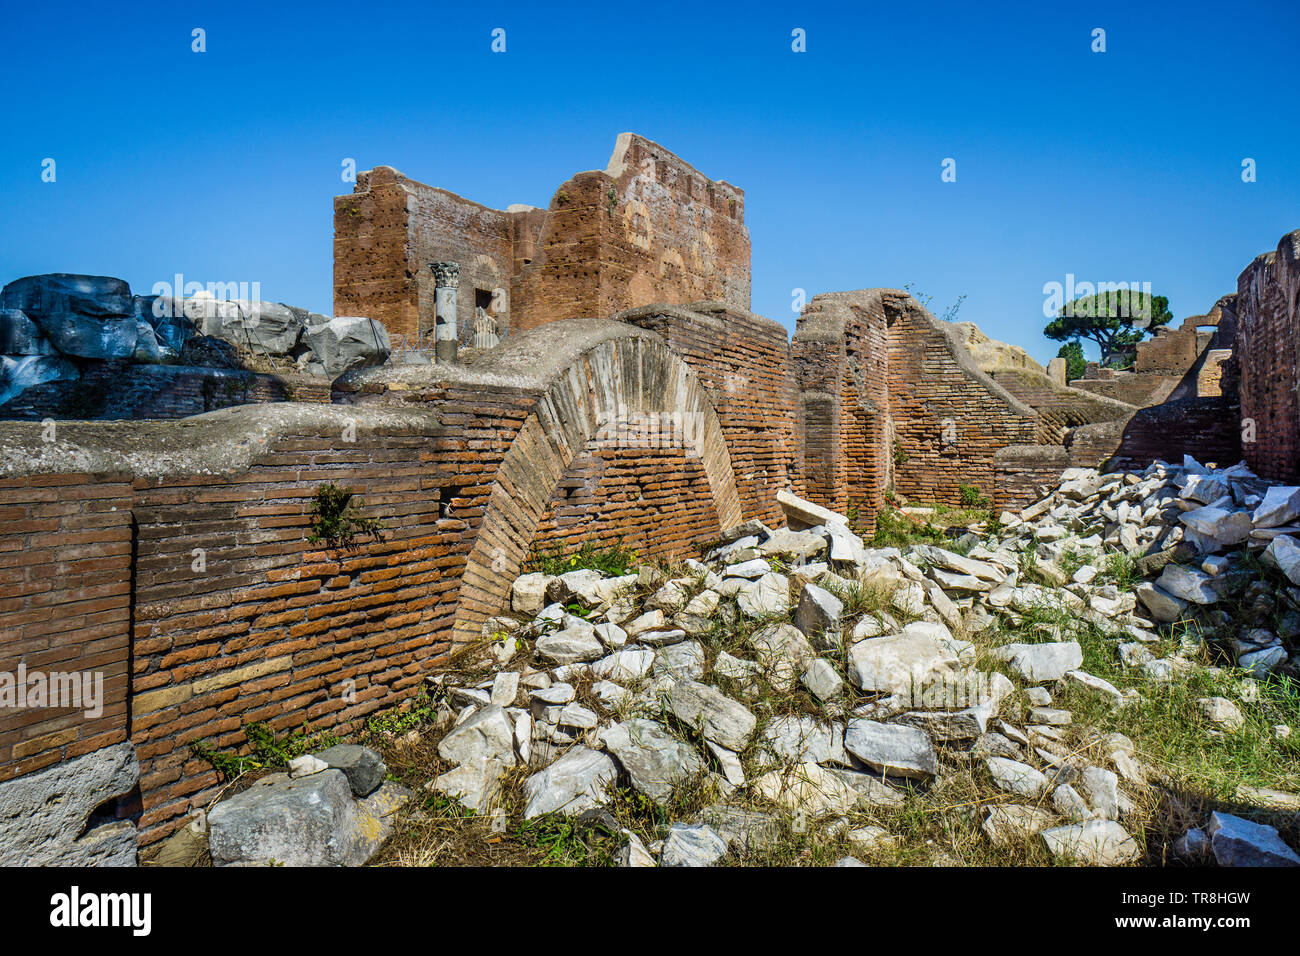 glimpse of the Capitolium from the ruins of the neighbouring Thermopolium at the archeological site of the Roman settlement of Ostia Antica, the ancie Stock Photo